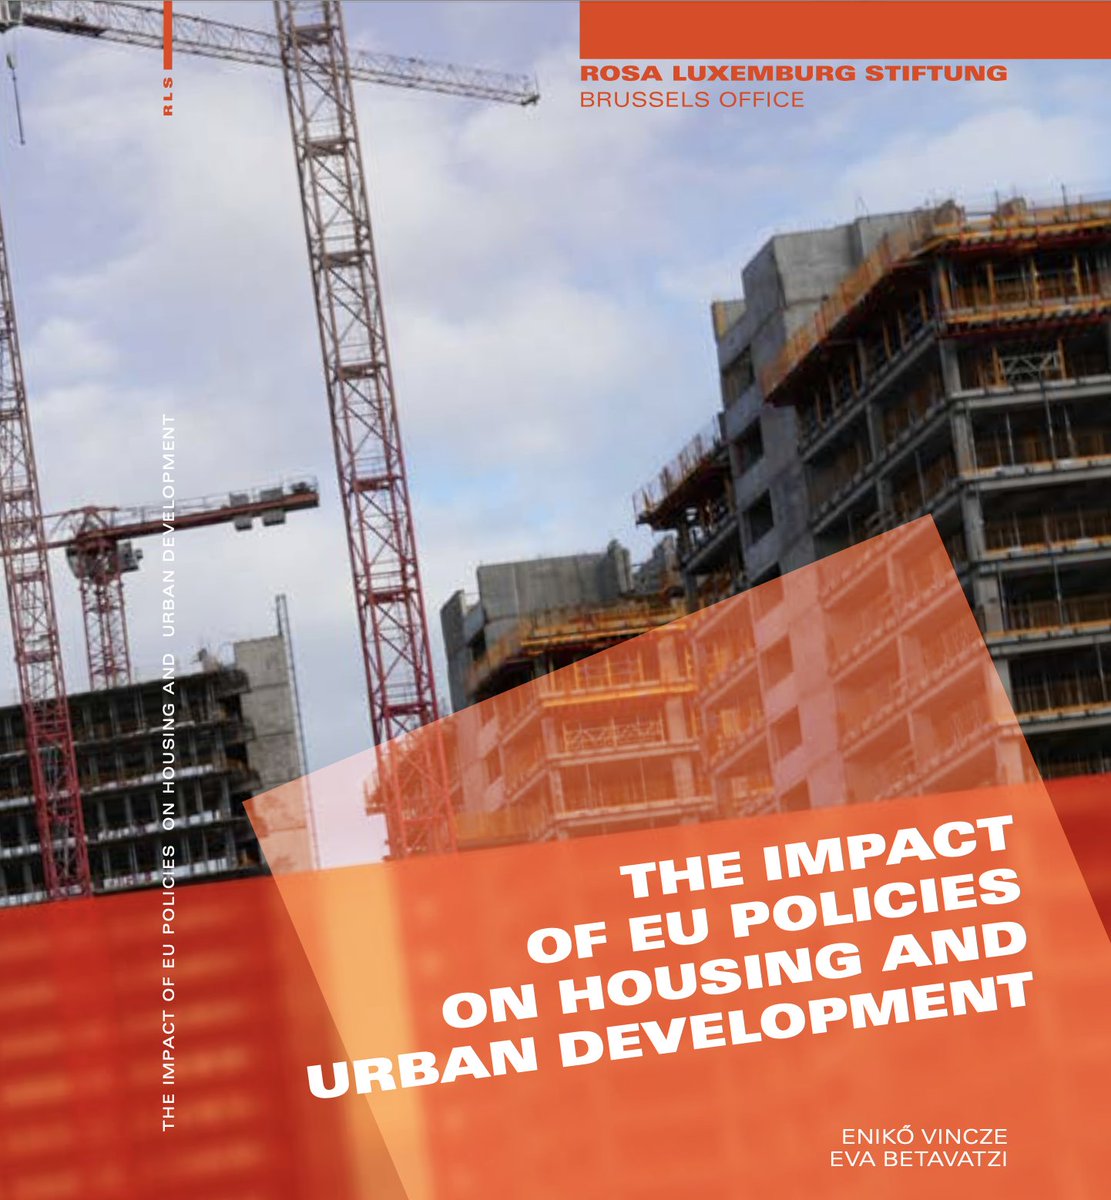 👉 Don't miss our WEBINAR on Thursday at 19h CET Our comrades Eniko Vincze and Eva Batavatzi will talk about impact of EU policies on housing and urban development. The conversation will be introduced by Sophia Thoenes from RLS Brussels. Get to know our speakers!